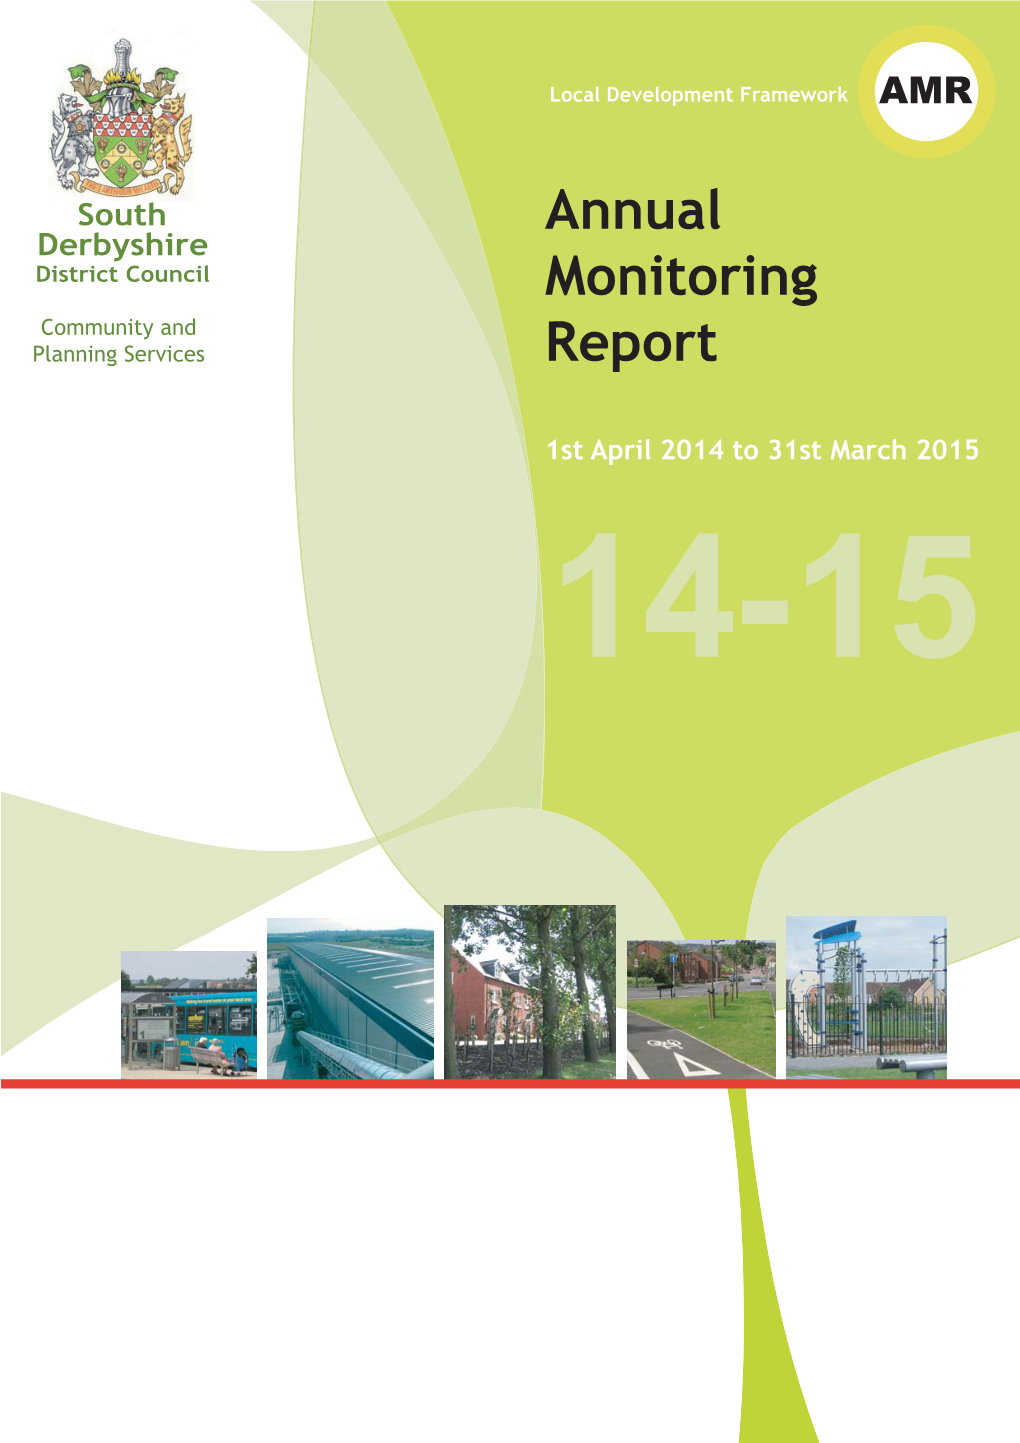 Annual Monitoring Report (AMR) for South Derbyshire District Council and Covers the Period 1 April 2014 to 31 March 2015